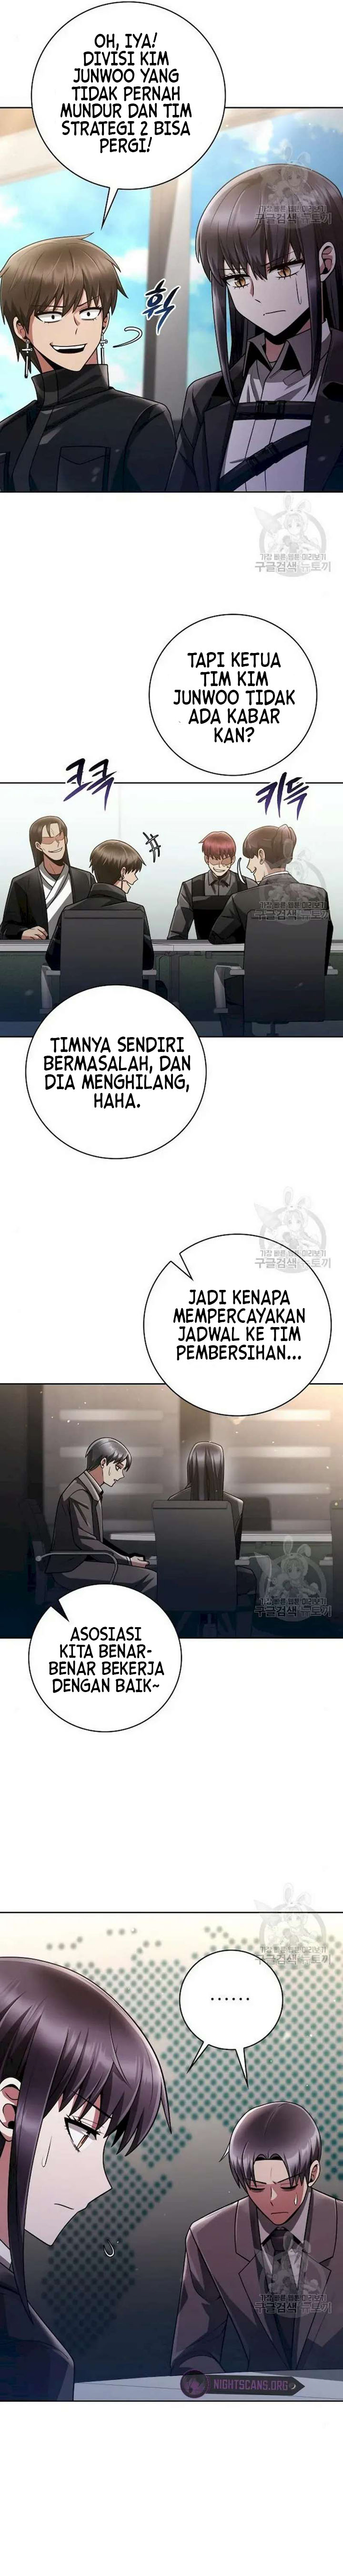 Dilarang COPAS - situs resmi www.mangacanblog.com - Komik clever cleaning life of the returned genius hunter 041 - chapter 41 42 Indonesia clever cleaning life of the returned genius hunter 041 - chapter 41 Terbaru 5|Baca Manga Komik Indonesia|Mangacan